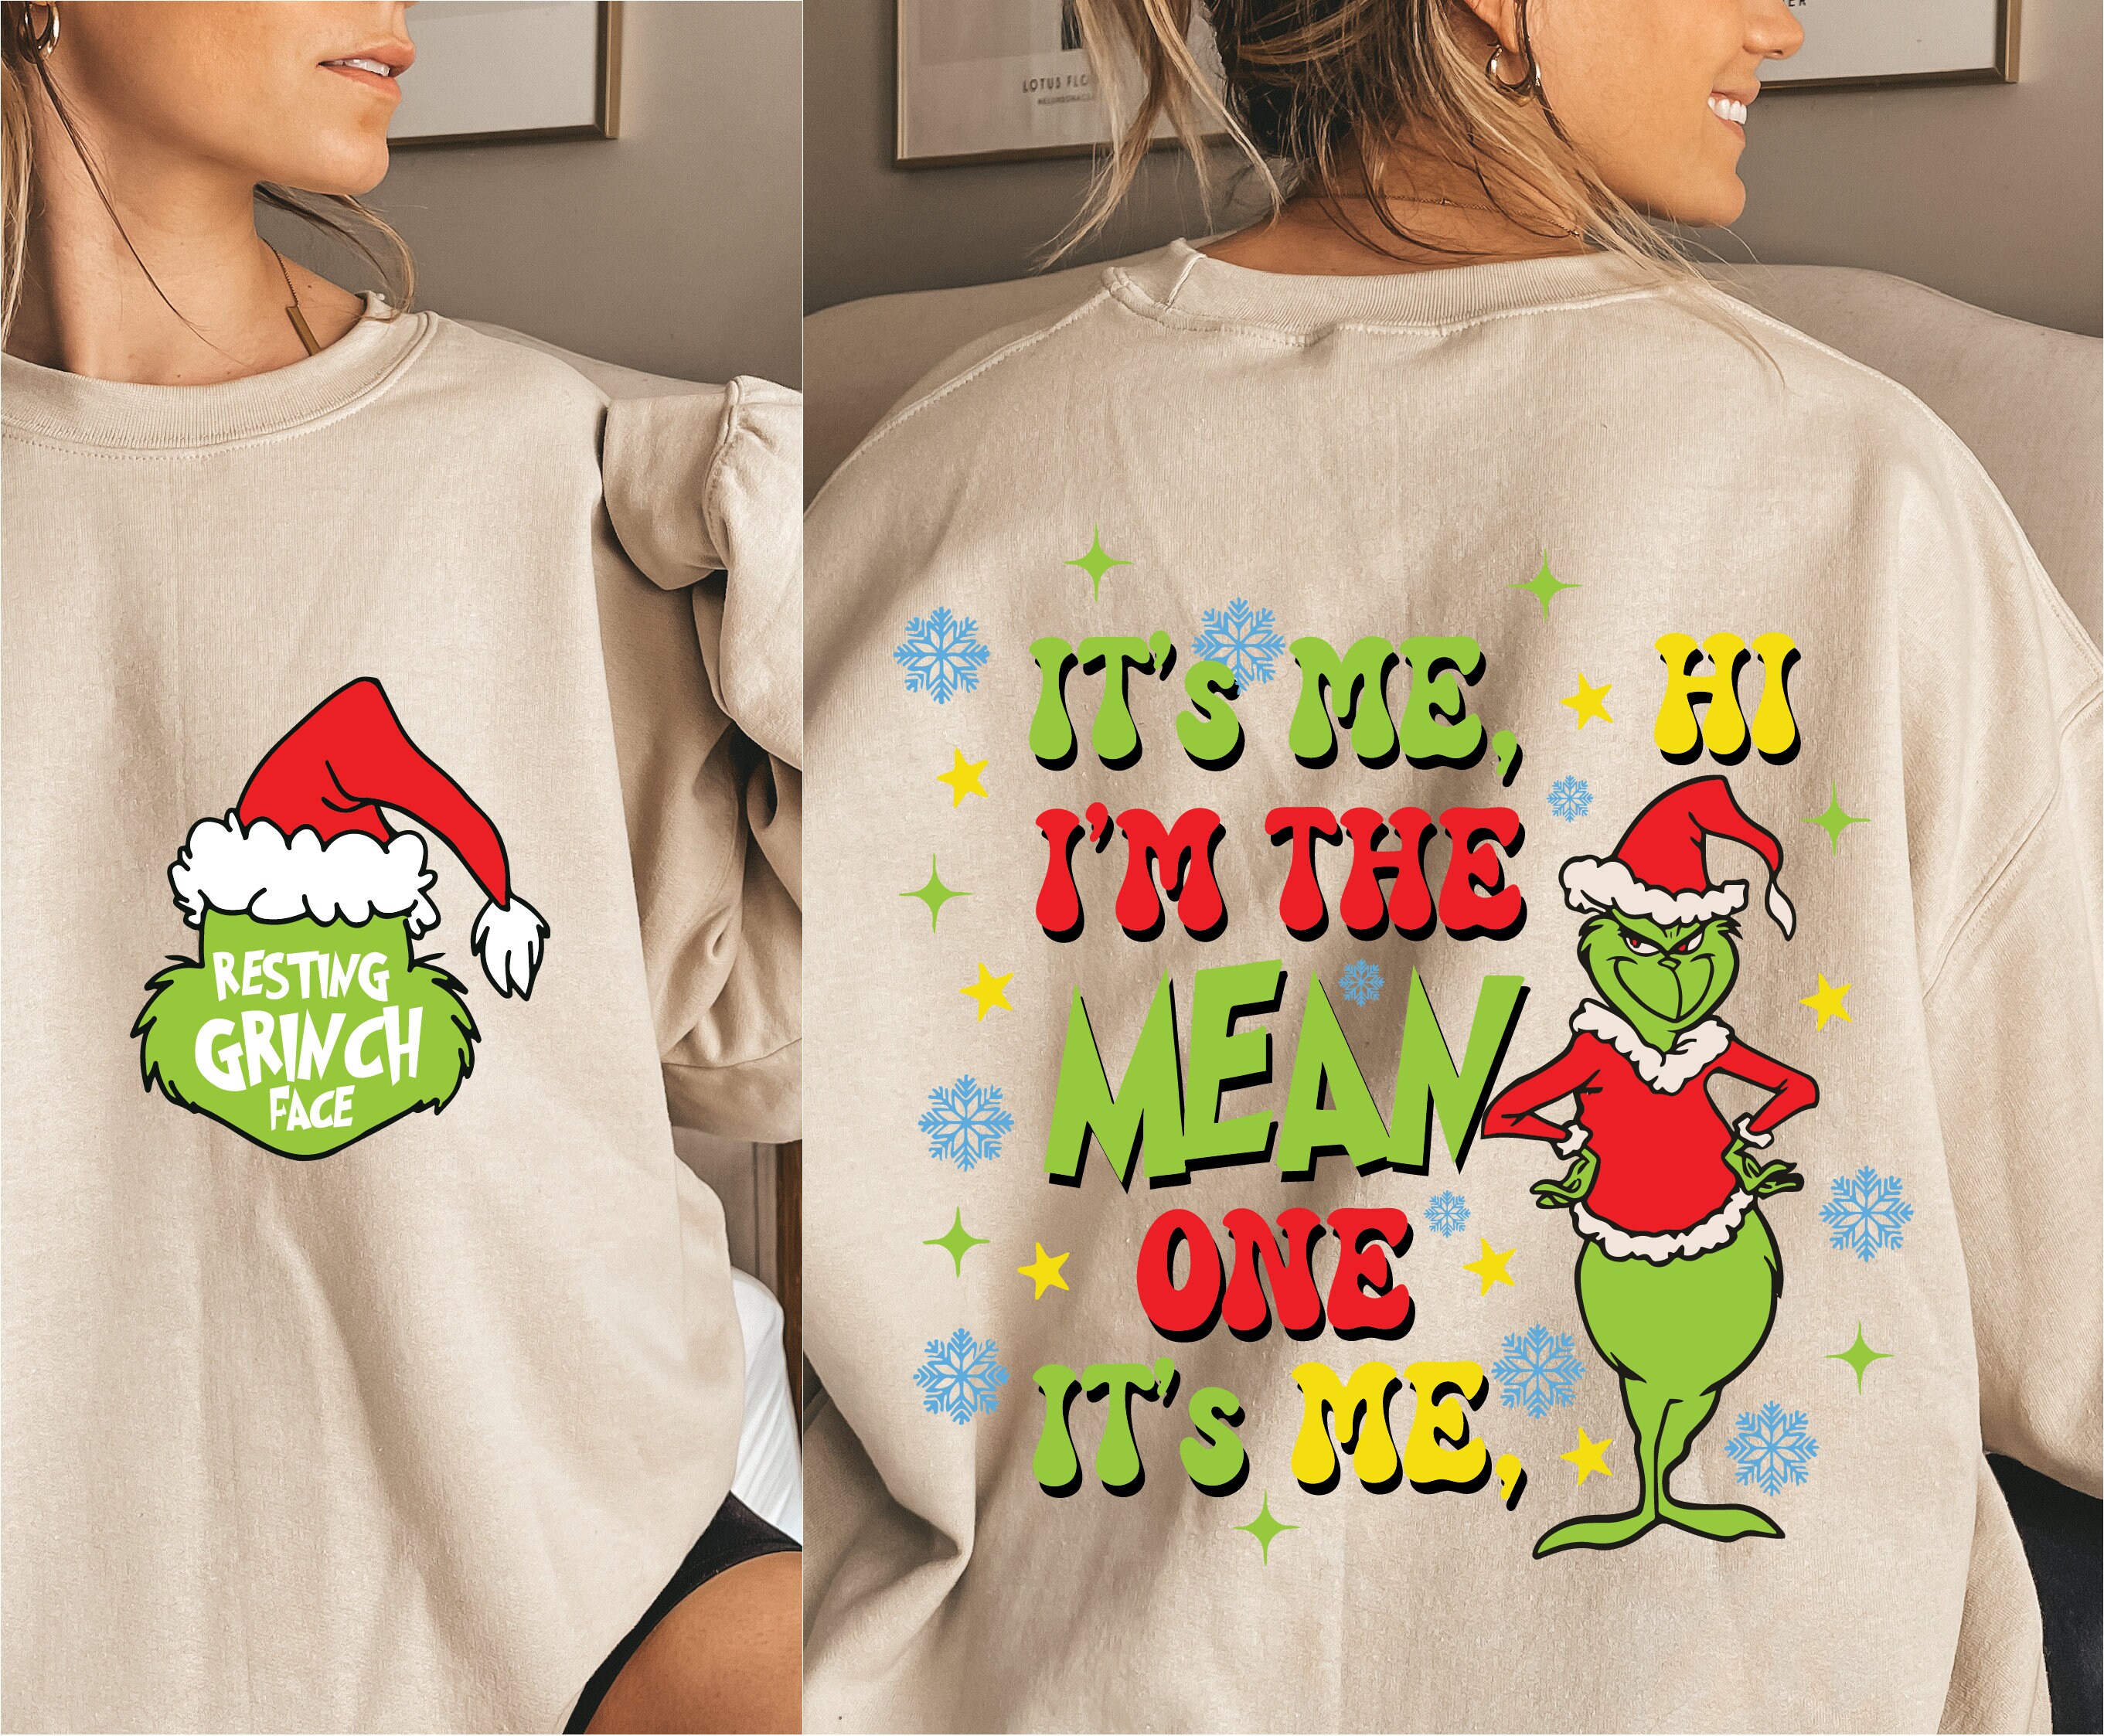 Resting Grinch Face Svg This İs My Resting Grinch Face Svg - Etsy